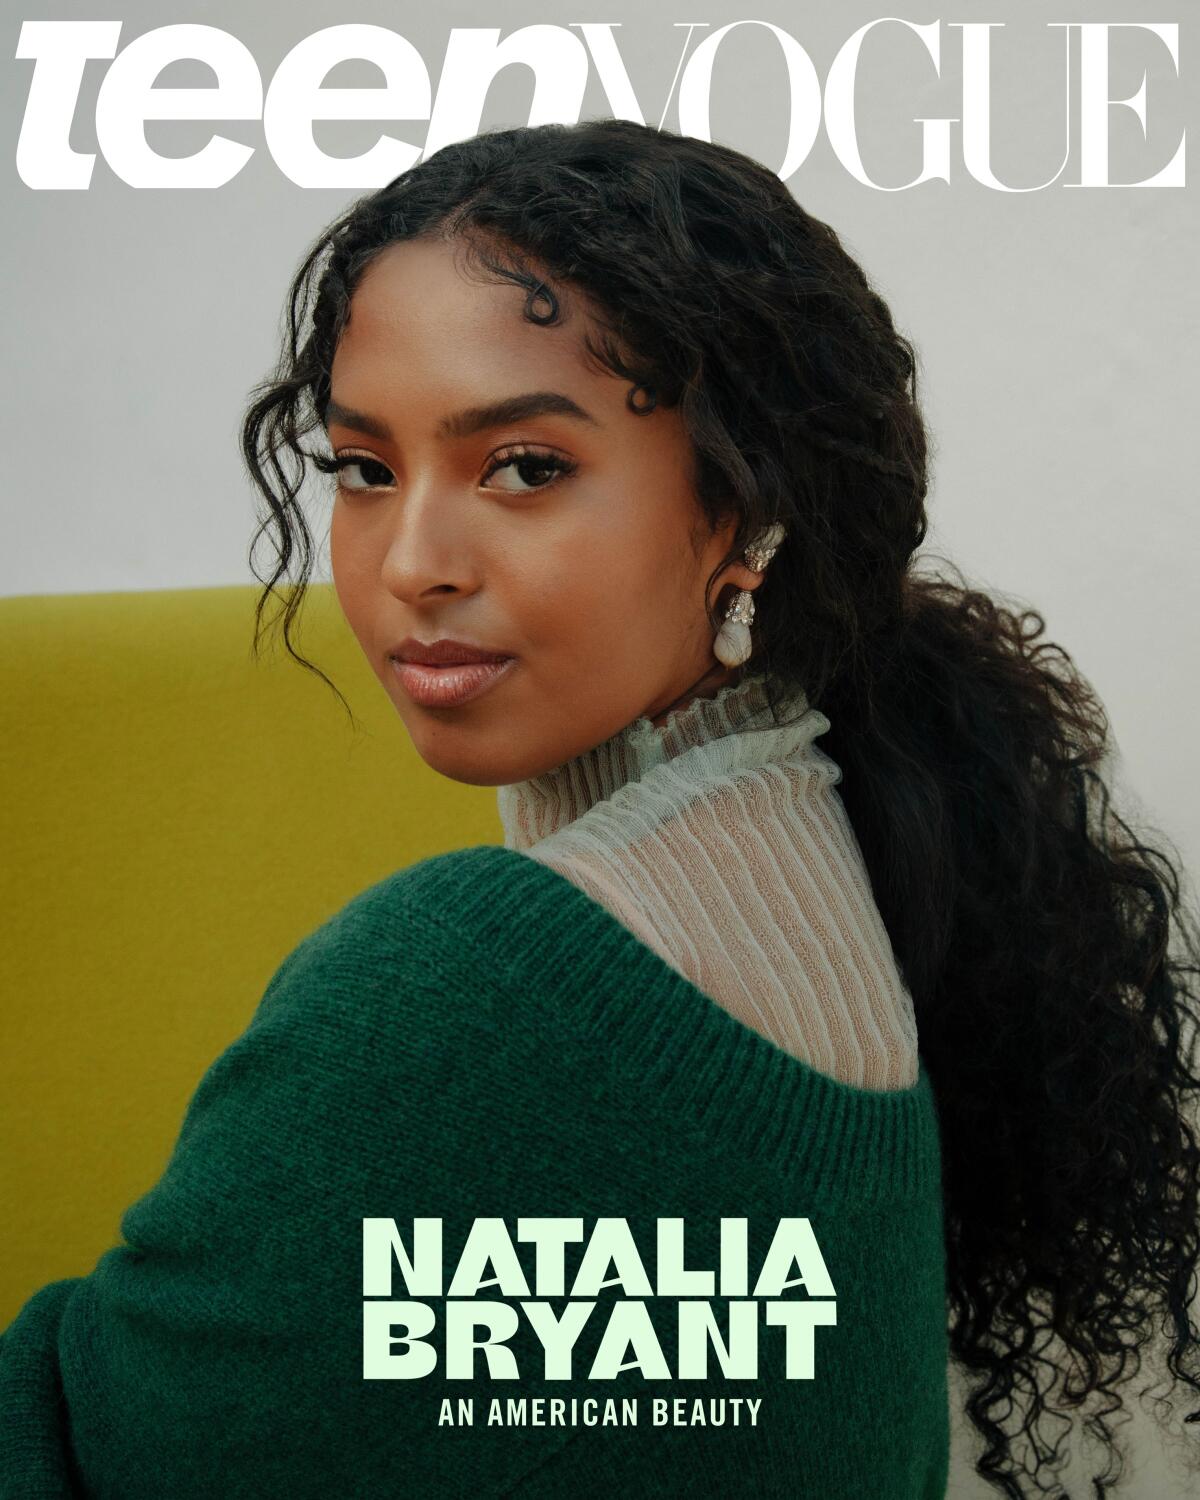 Natalia Bryant with long, black hair posing on a Teen Vogue magazine cover